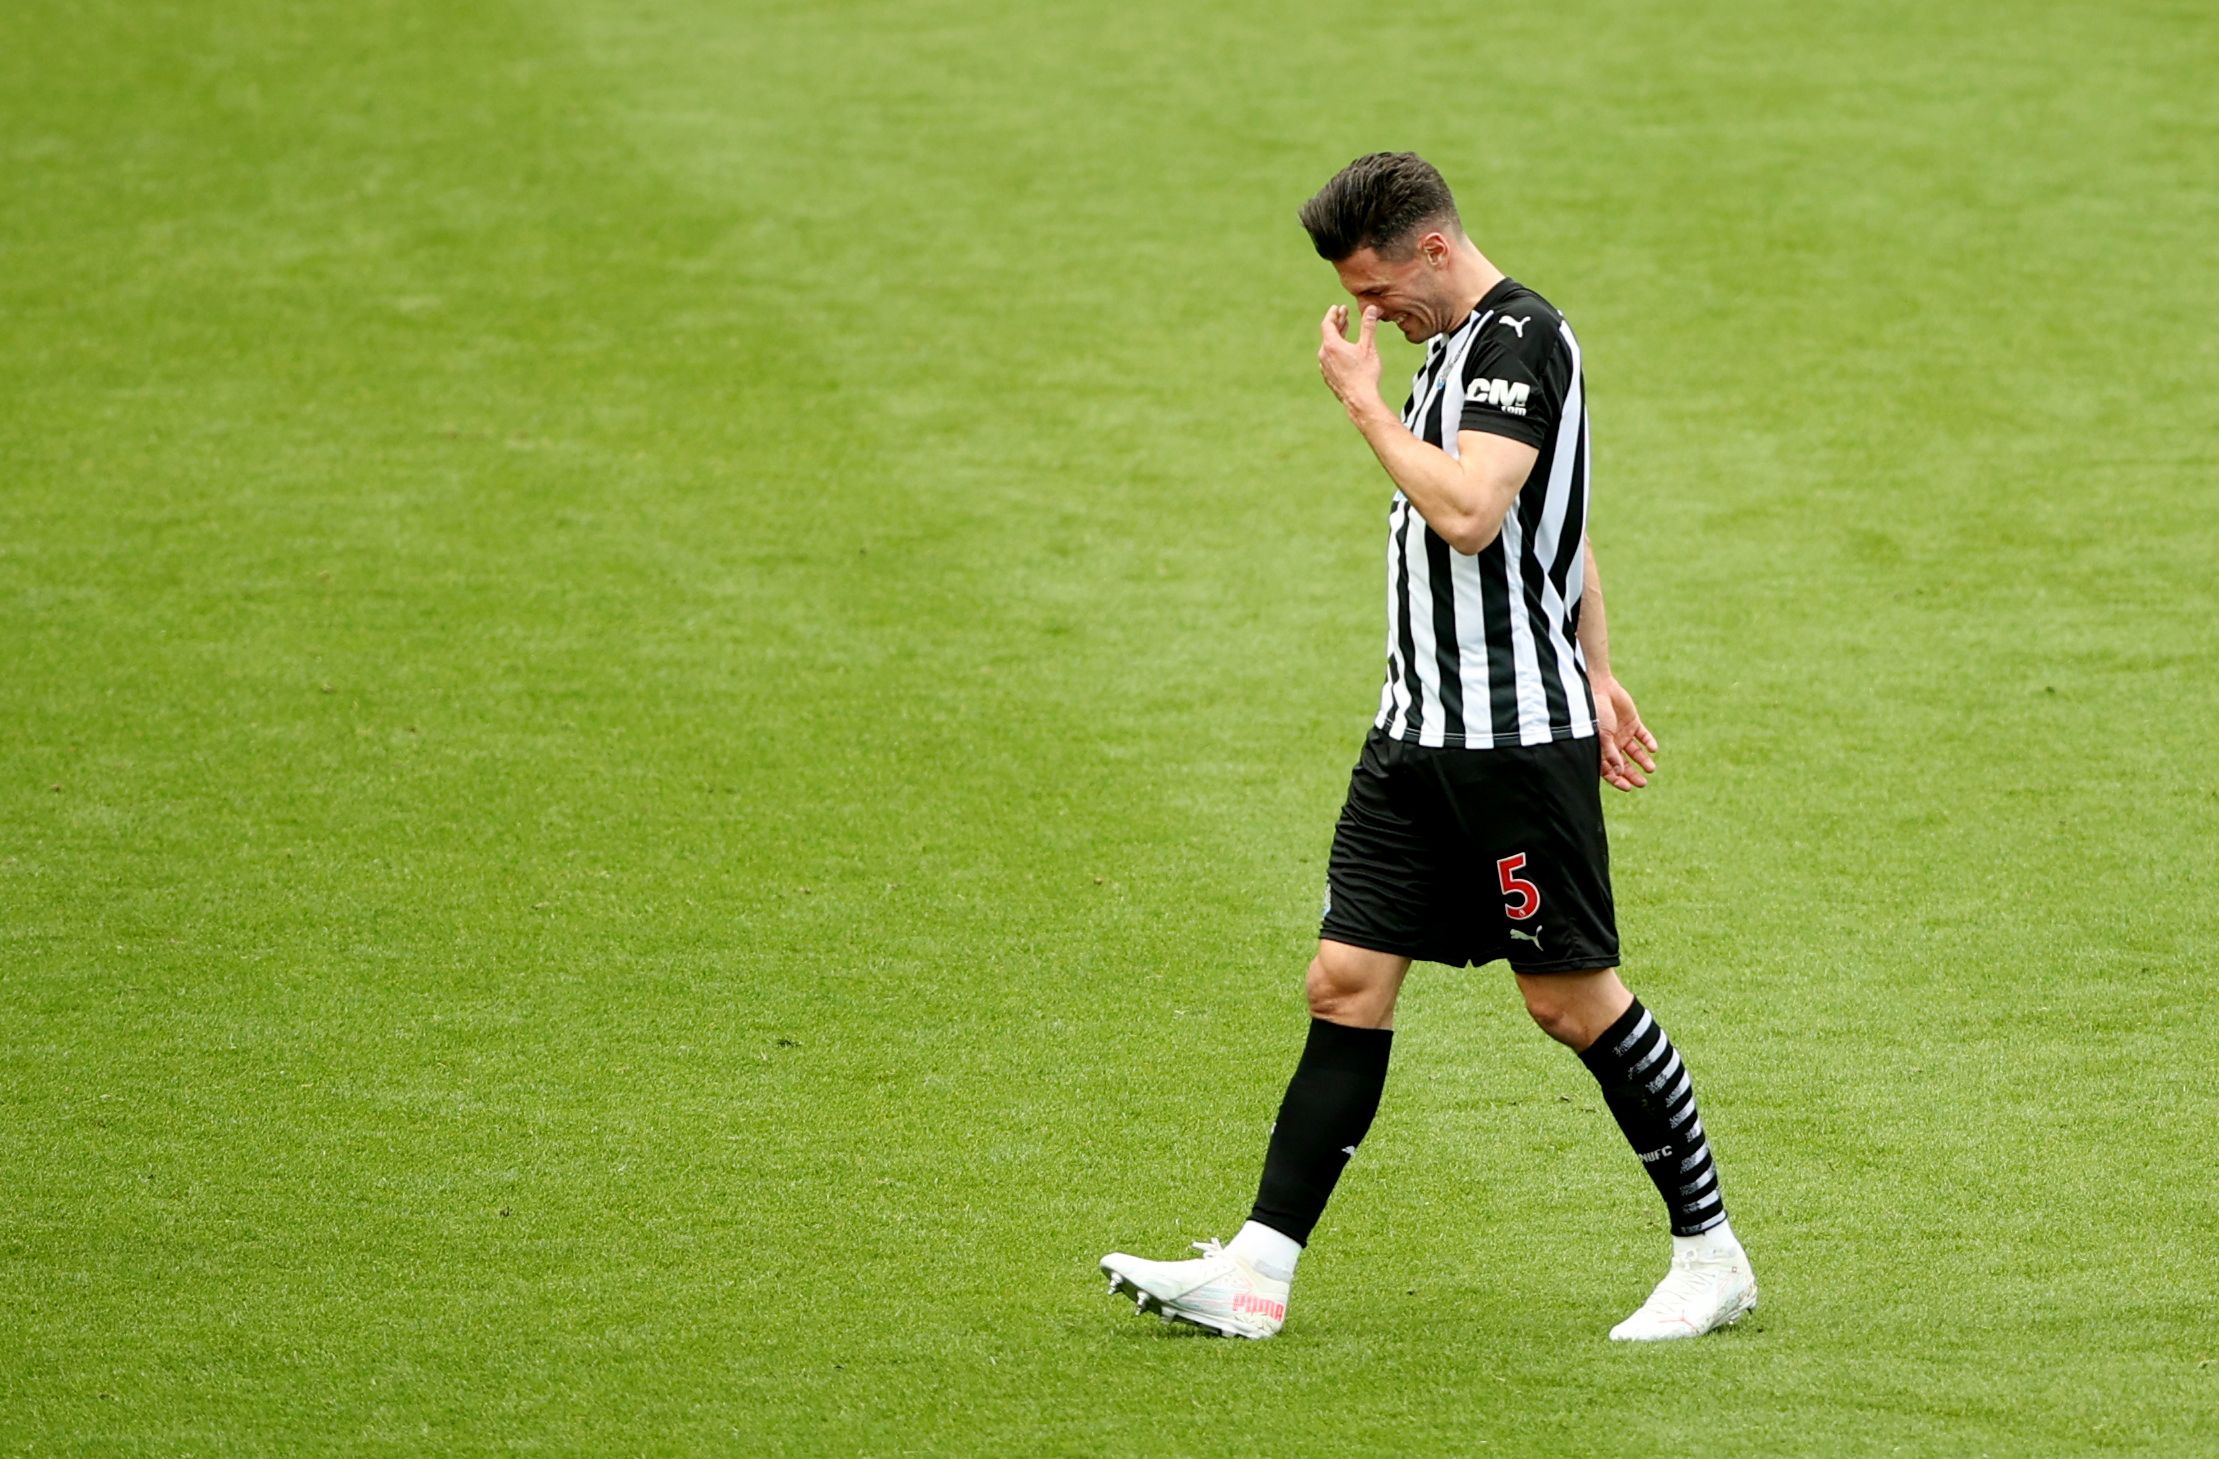 Soccer Football - Premier League - Newcastle United v Arsenal - St James' Park, Newcastle, Britain - May 2, 2021 Newcastle United's Fabian Schar walks off the pitch after a red card Pool via REUTERS/Molly Darlington EDITORIAL USE ONLY. No use with unauthorized audio, video, data, fixture lists, club/league logos or 'live' services. Online in-match use limited to 75 images, no video emulation. No use in betting, games or single club /league/player publications.  Please contact your account repres